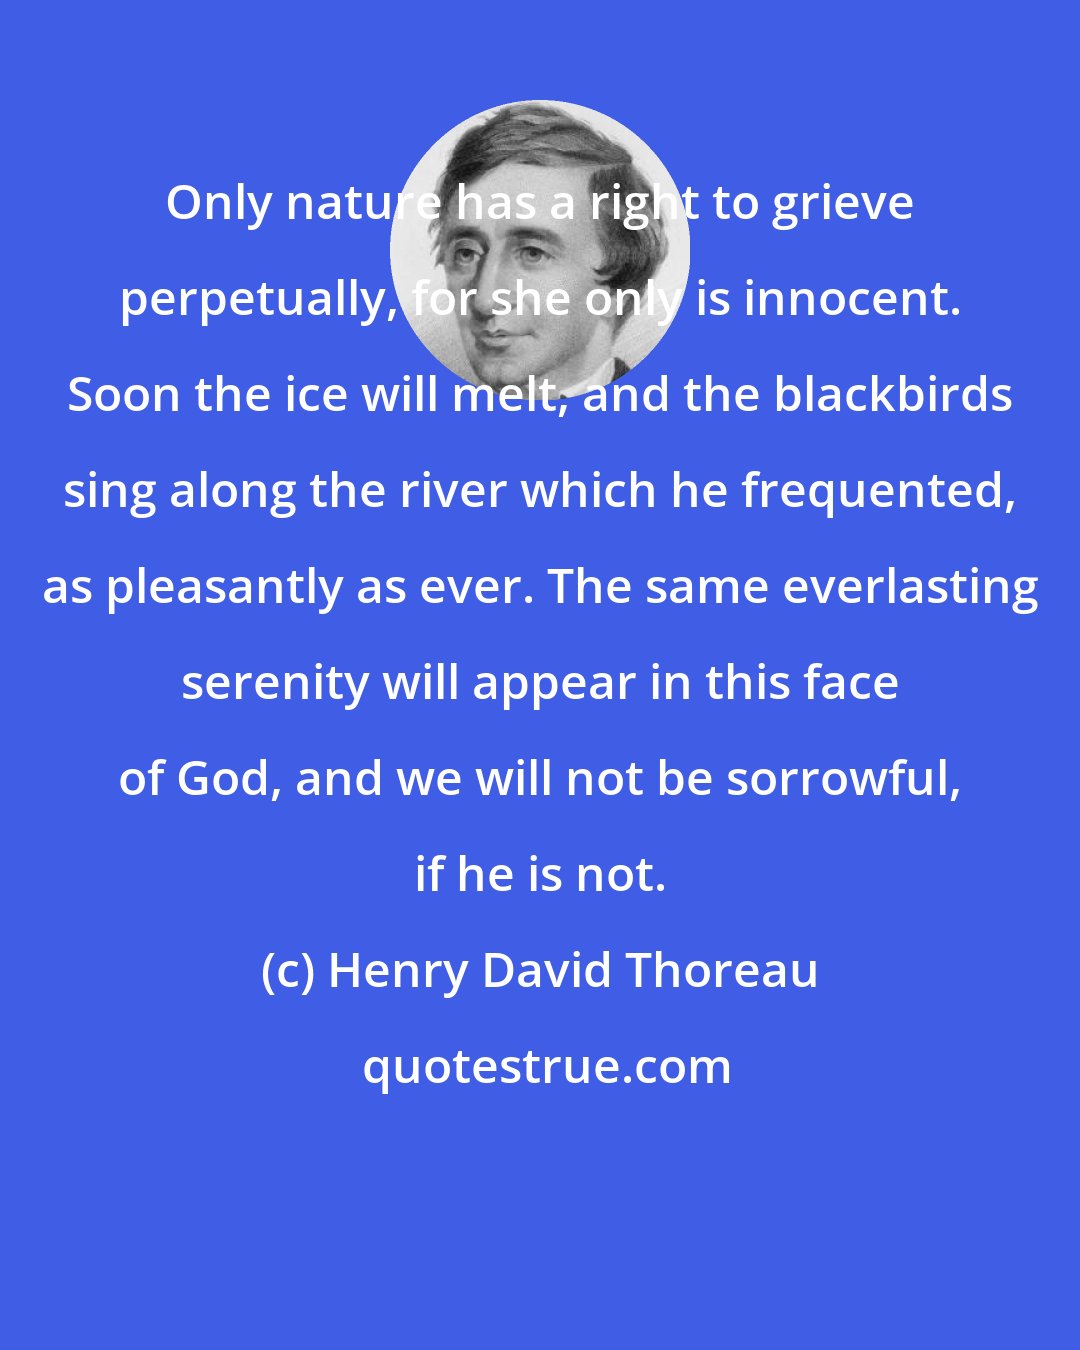 Henry David Thoreau: Only nature has a right to grieve perpetually, for she only is innocent. Soon the ice will melt, and the blackbirds sing along the river which he frequented, as pleasantly as ever. The same everlasting serenity will appear in this face of God, and we will not be sorrowful, if he is not.